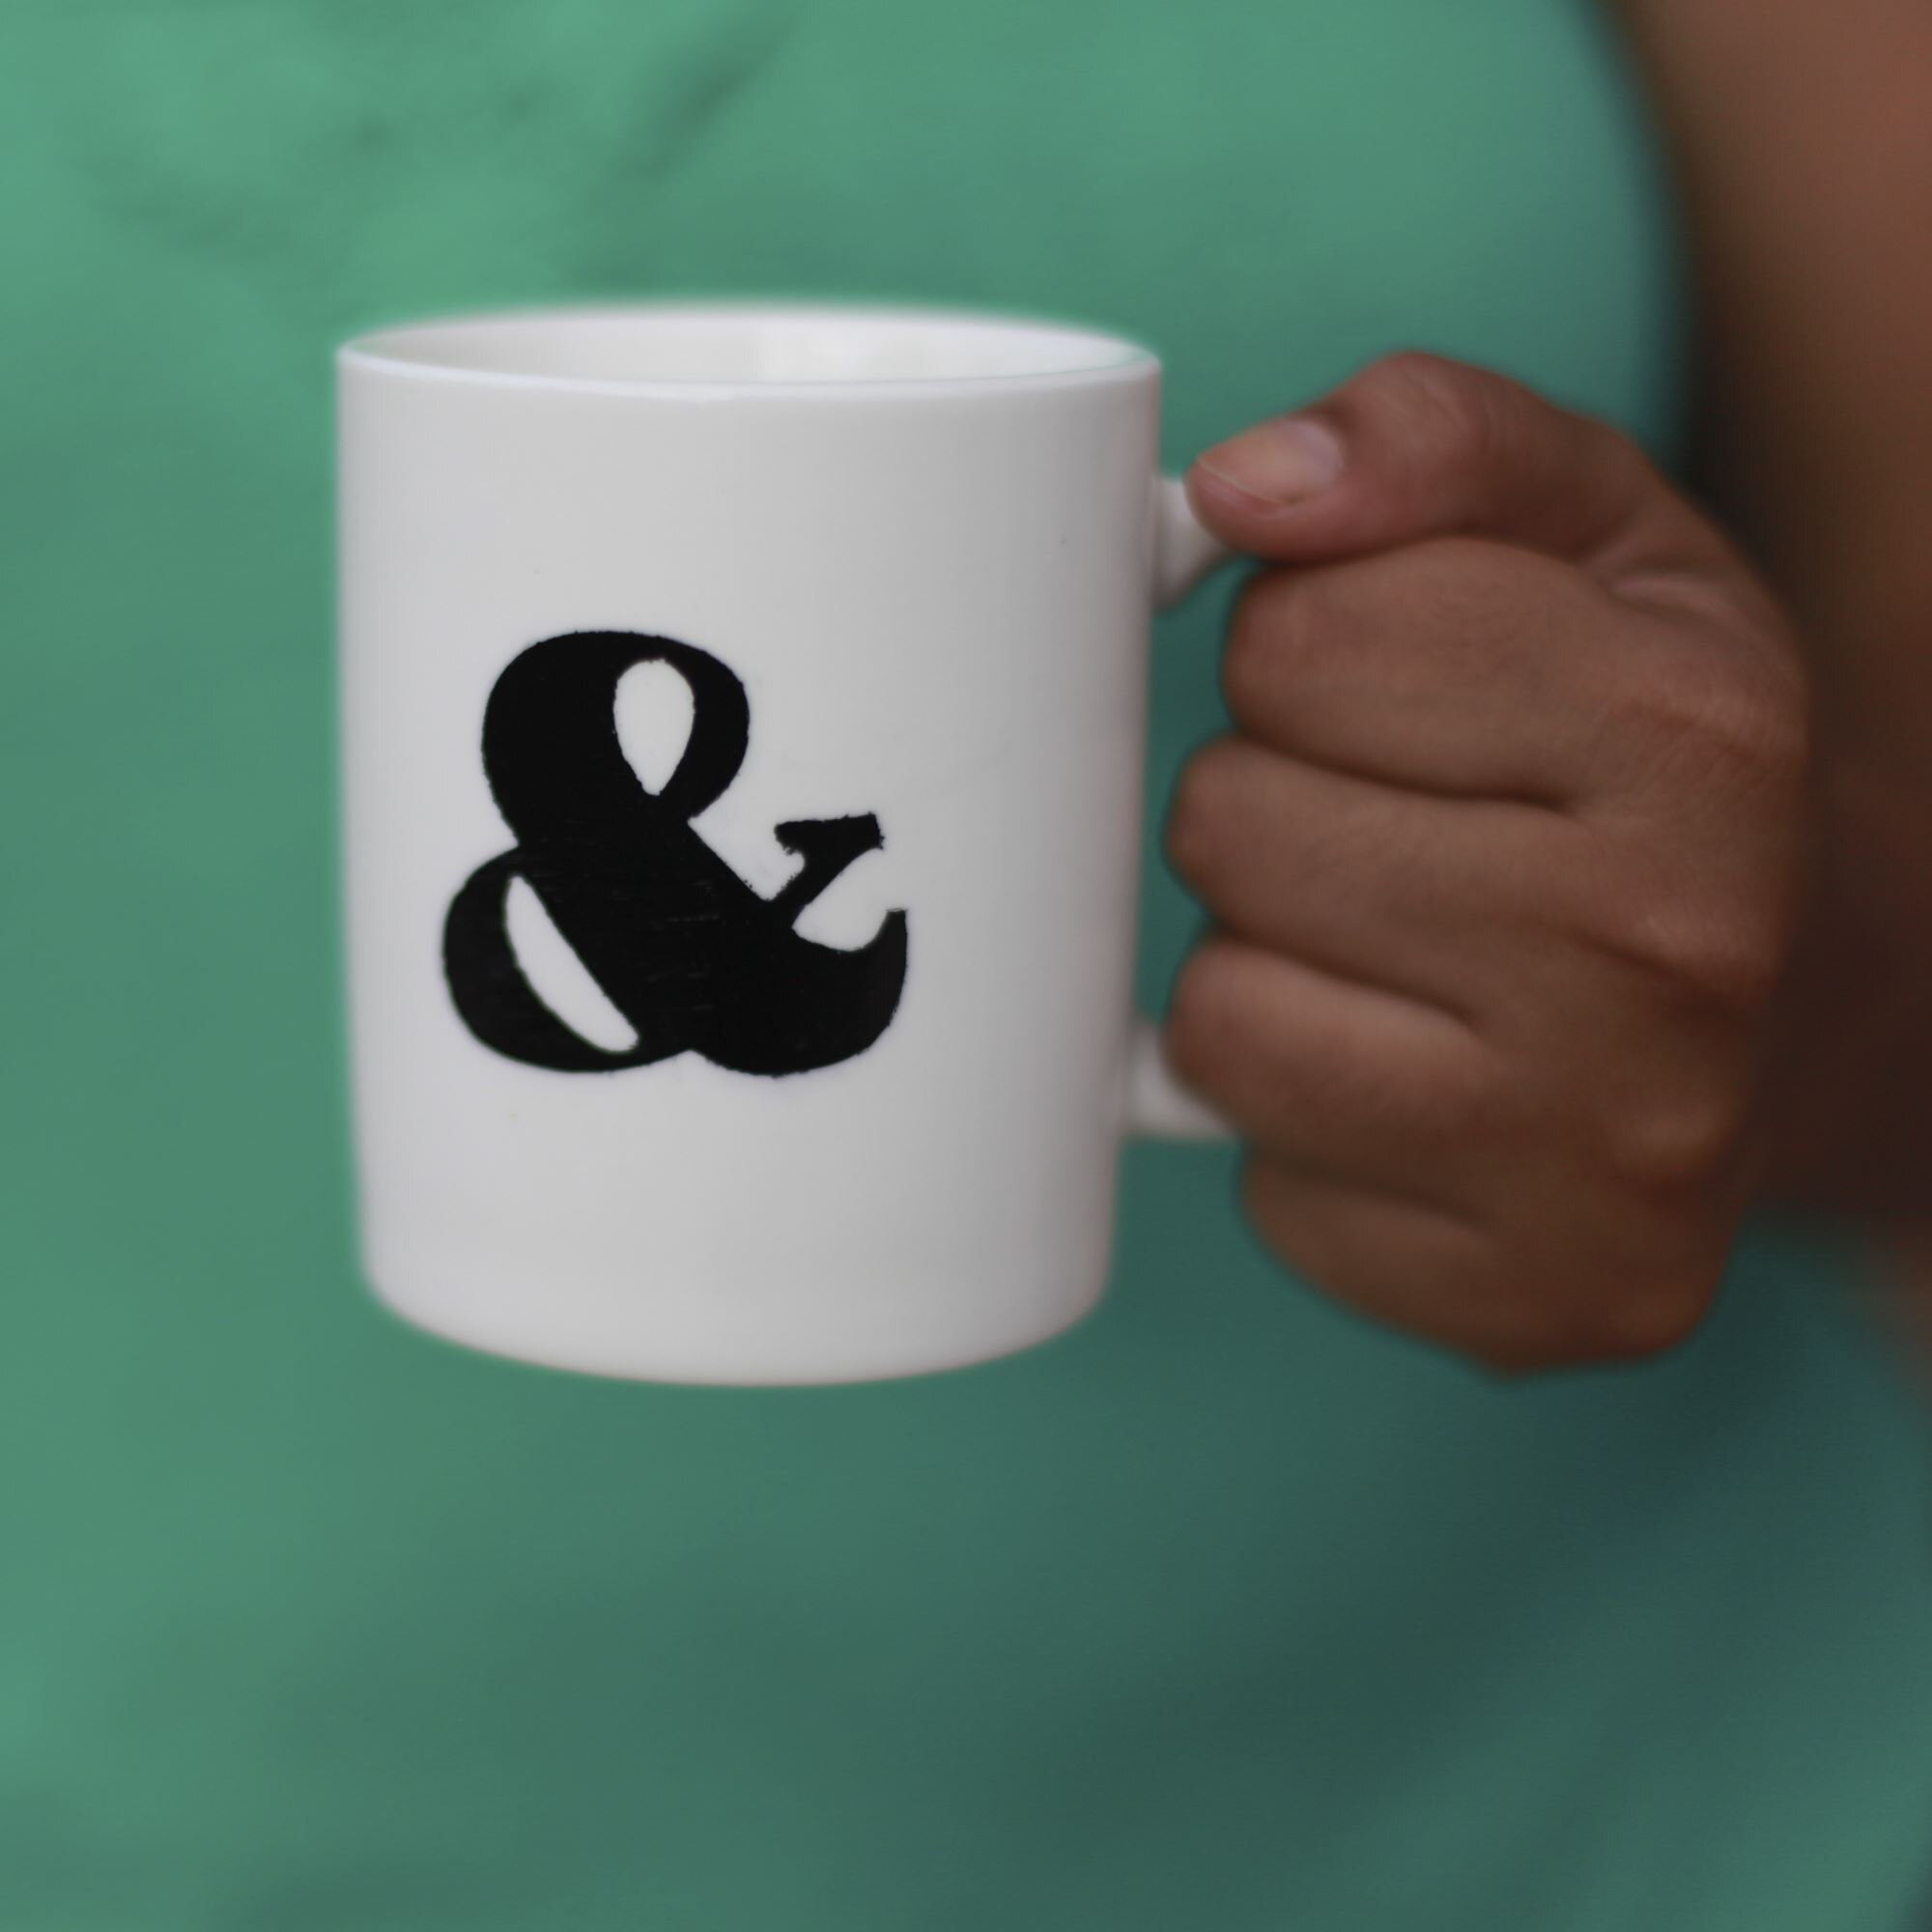 how to make your own personalized coffee mug